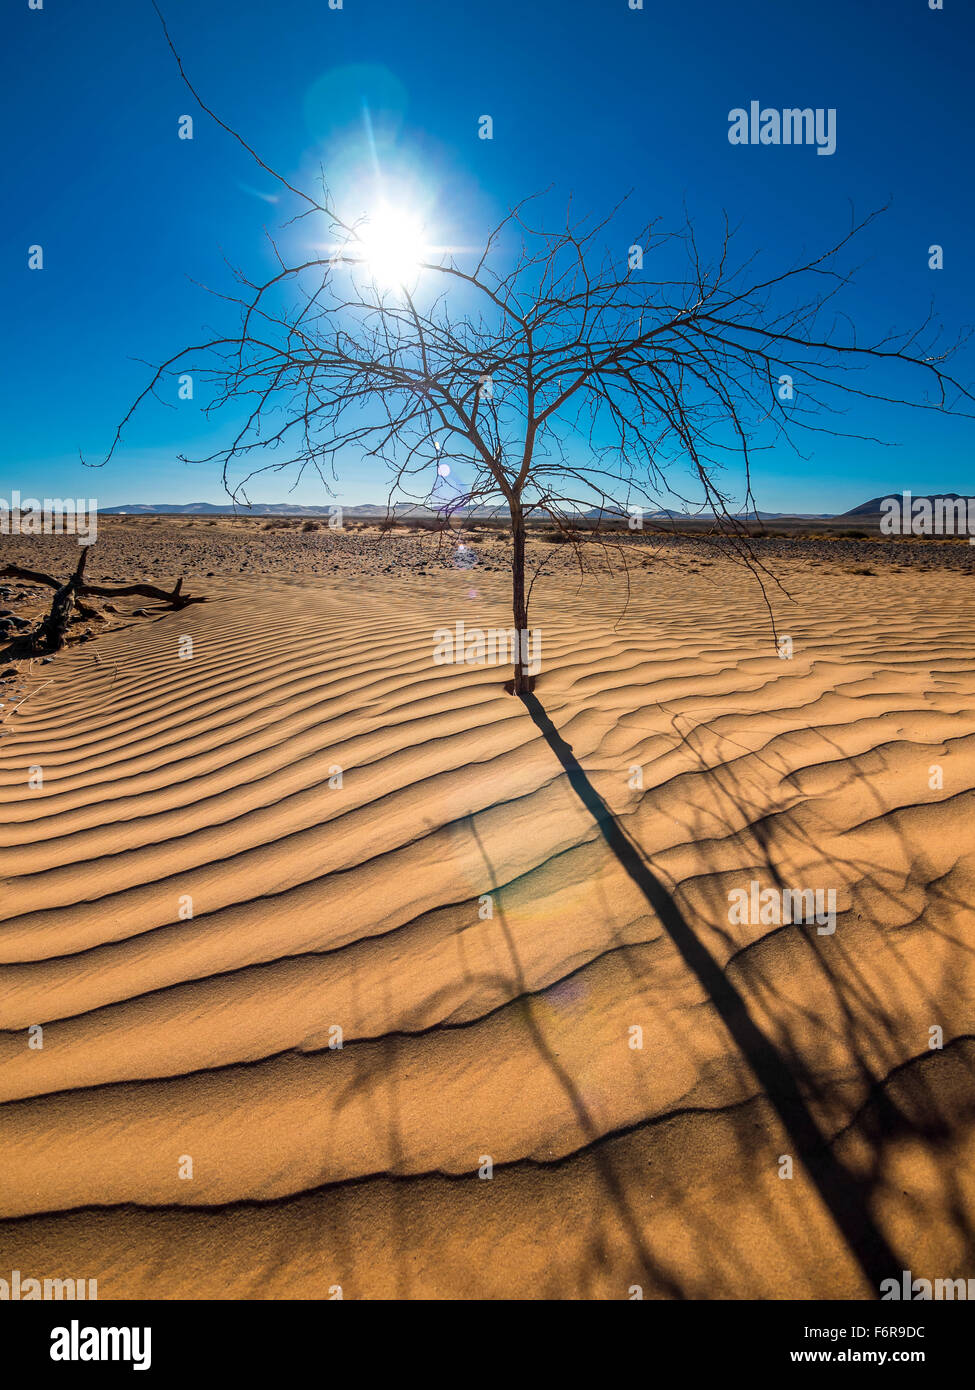 Dried out tree in the sand, Kulala Wilderness Reserve on the edge of the Namib Desert, Hardap Region, Namibia Stock Photo